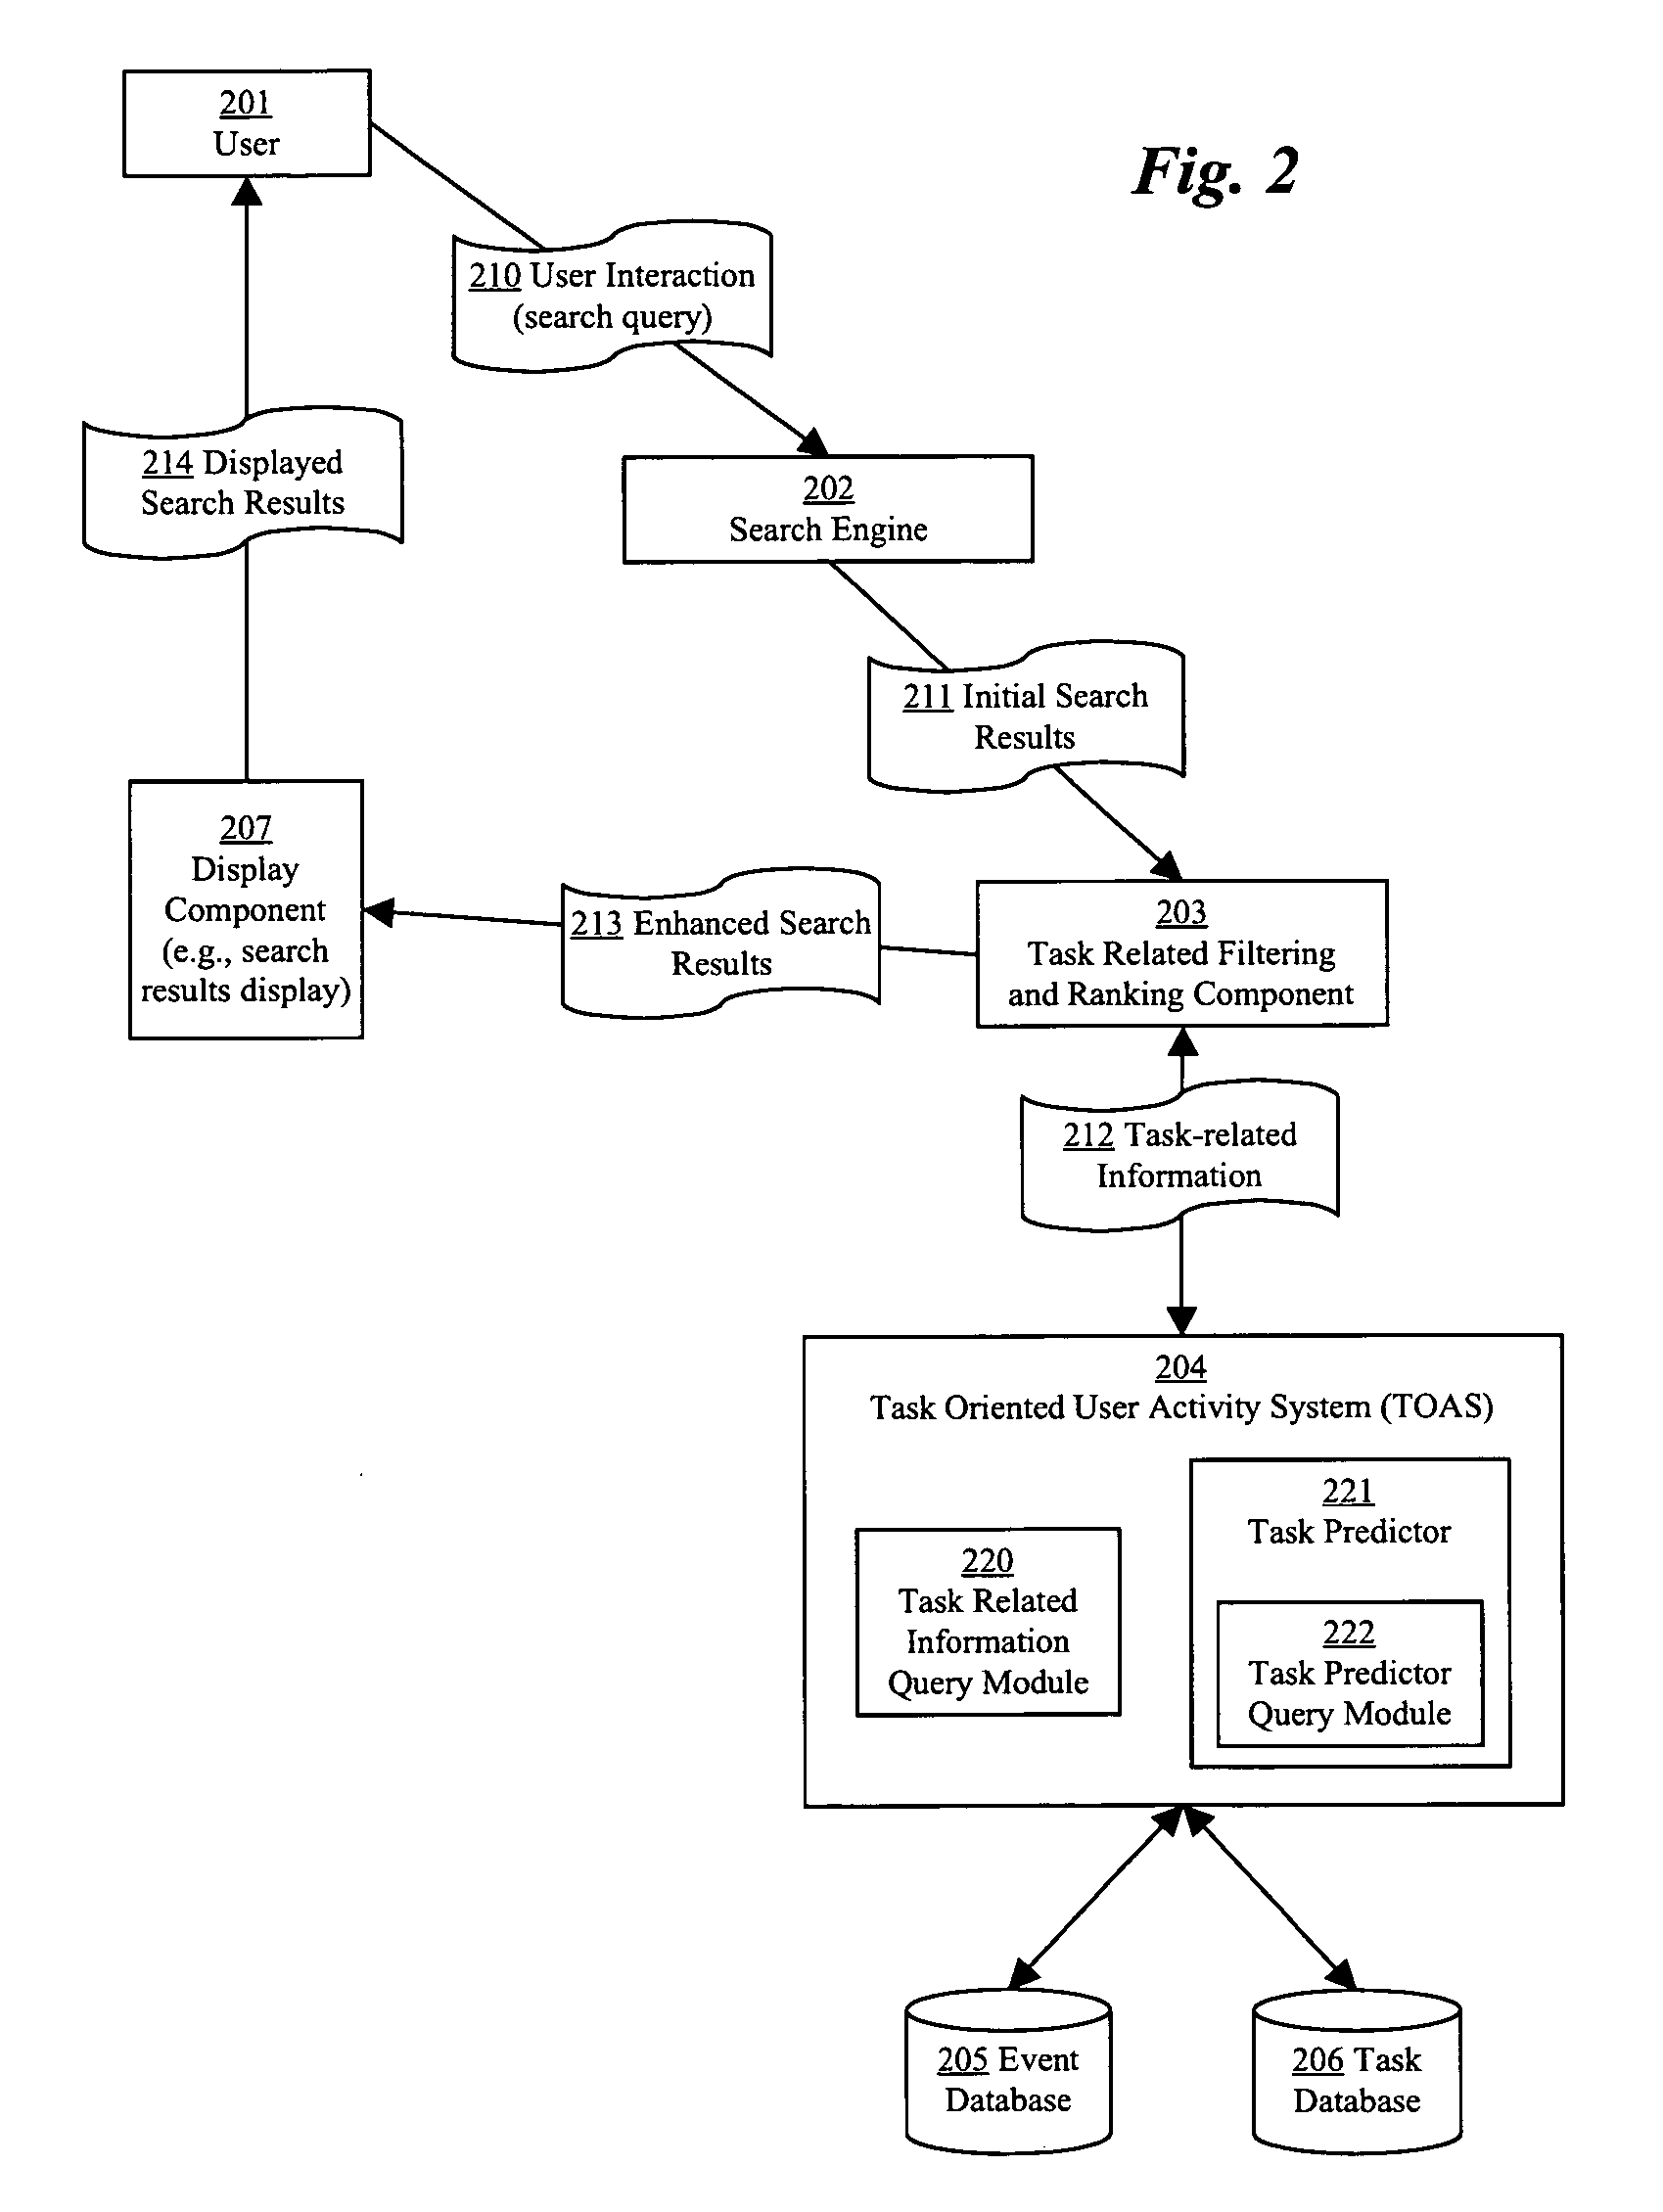 Methods for enhancing digital search query techniques based on task-oriented user activity